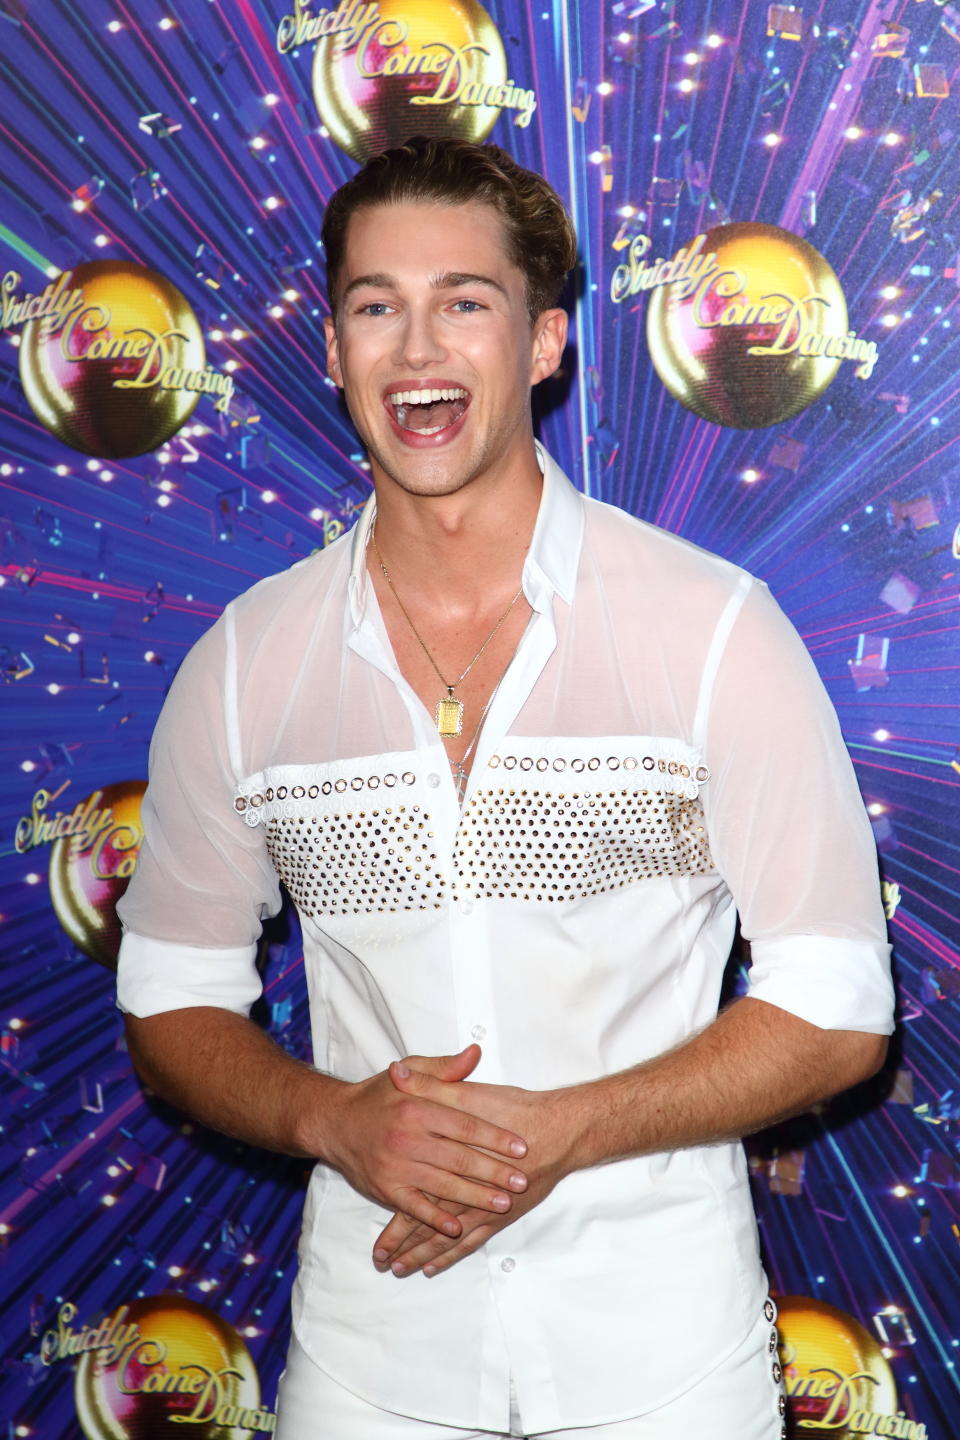 LONDON, UNITED KINGDOM - 2019/08/26: AJ Pritchard at the Strictly Come Dancing Launch at BBC Broadcasting House in London. (Photo by Keith Mayhew/SOPA Images/LightRocket via Getty Images)